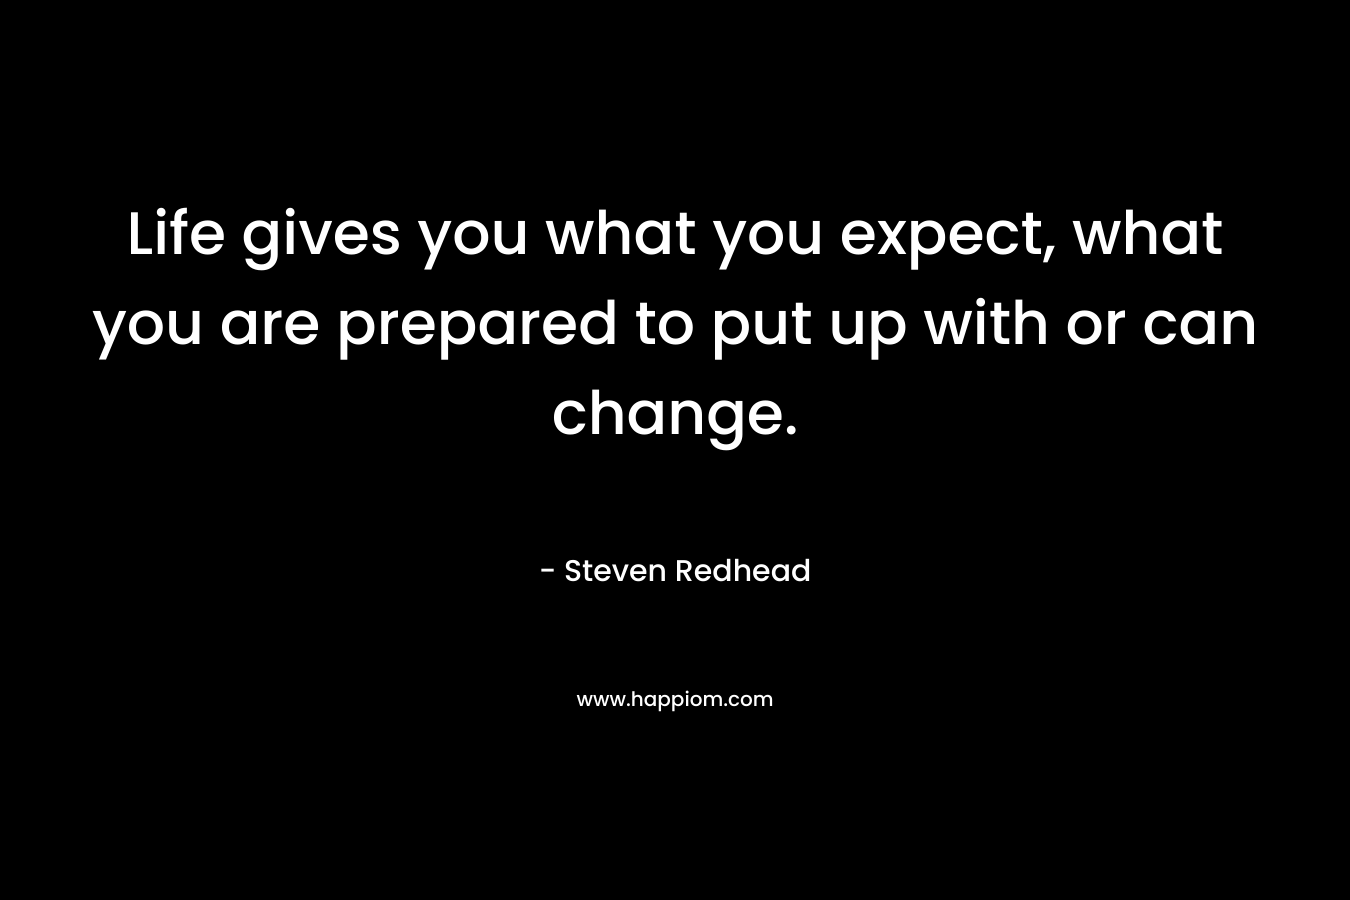 Life gives you what you expect, what you are prepared to put up with or can change.